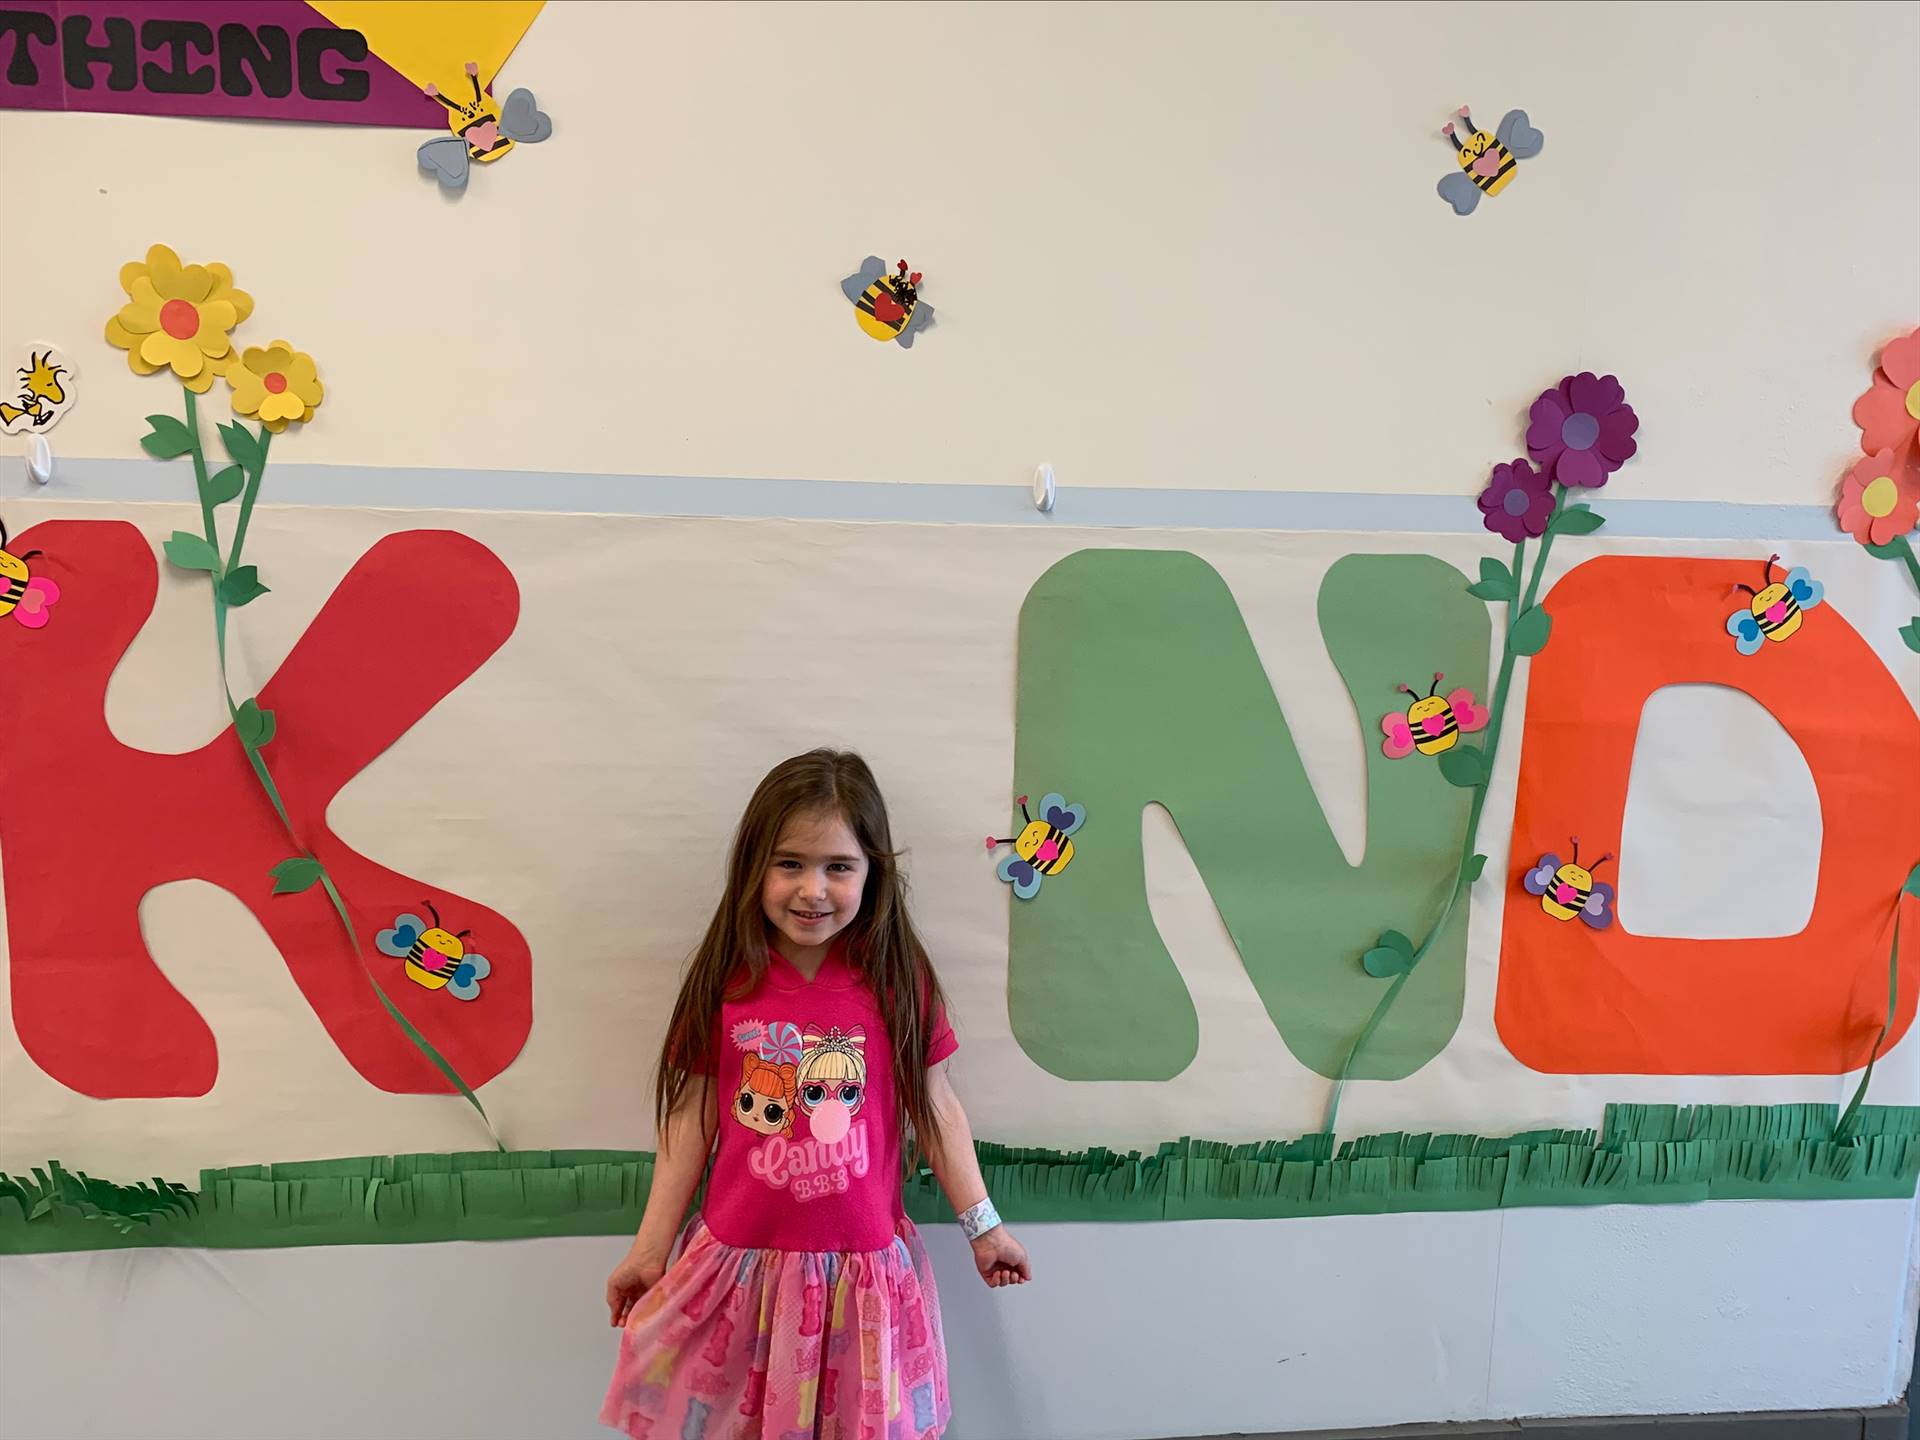 student is "I" in a large K I ND poster